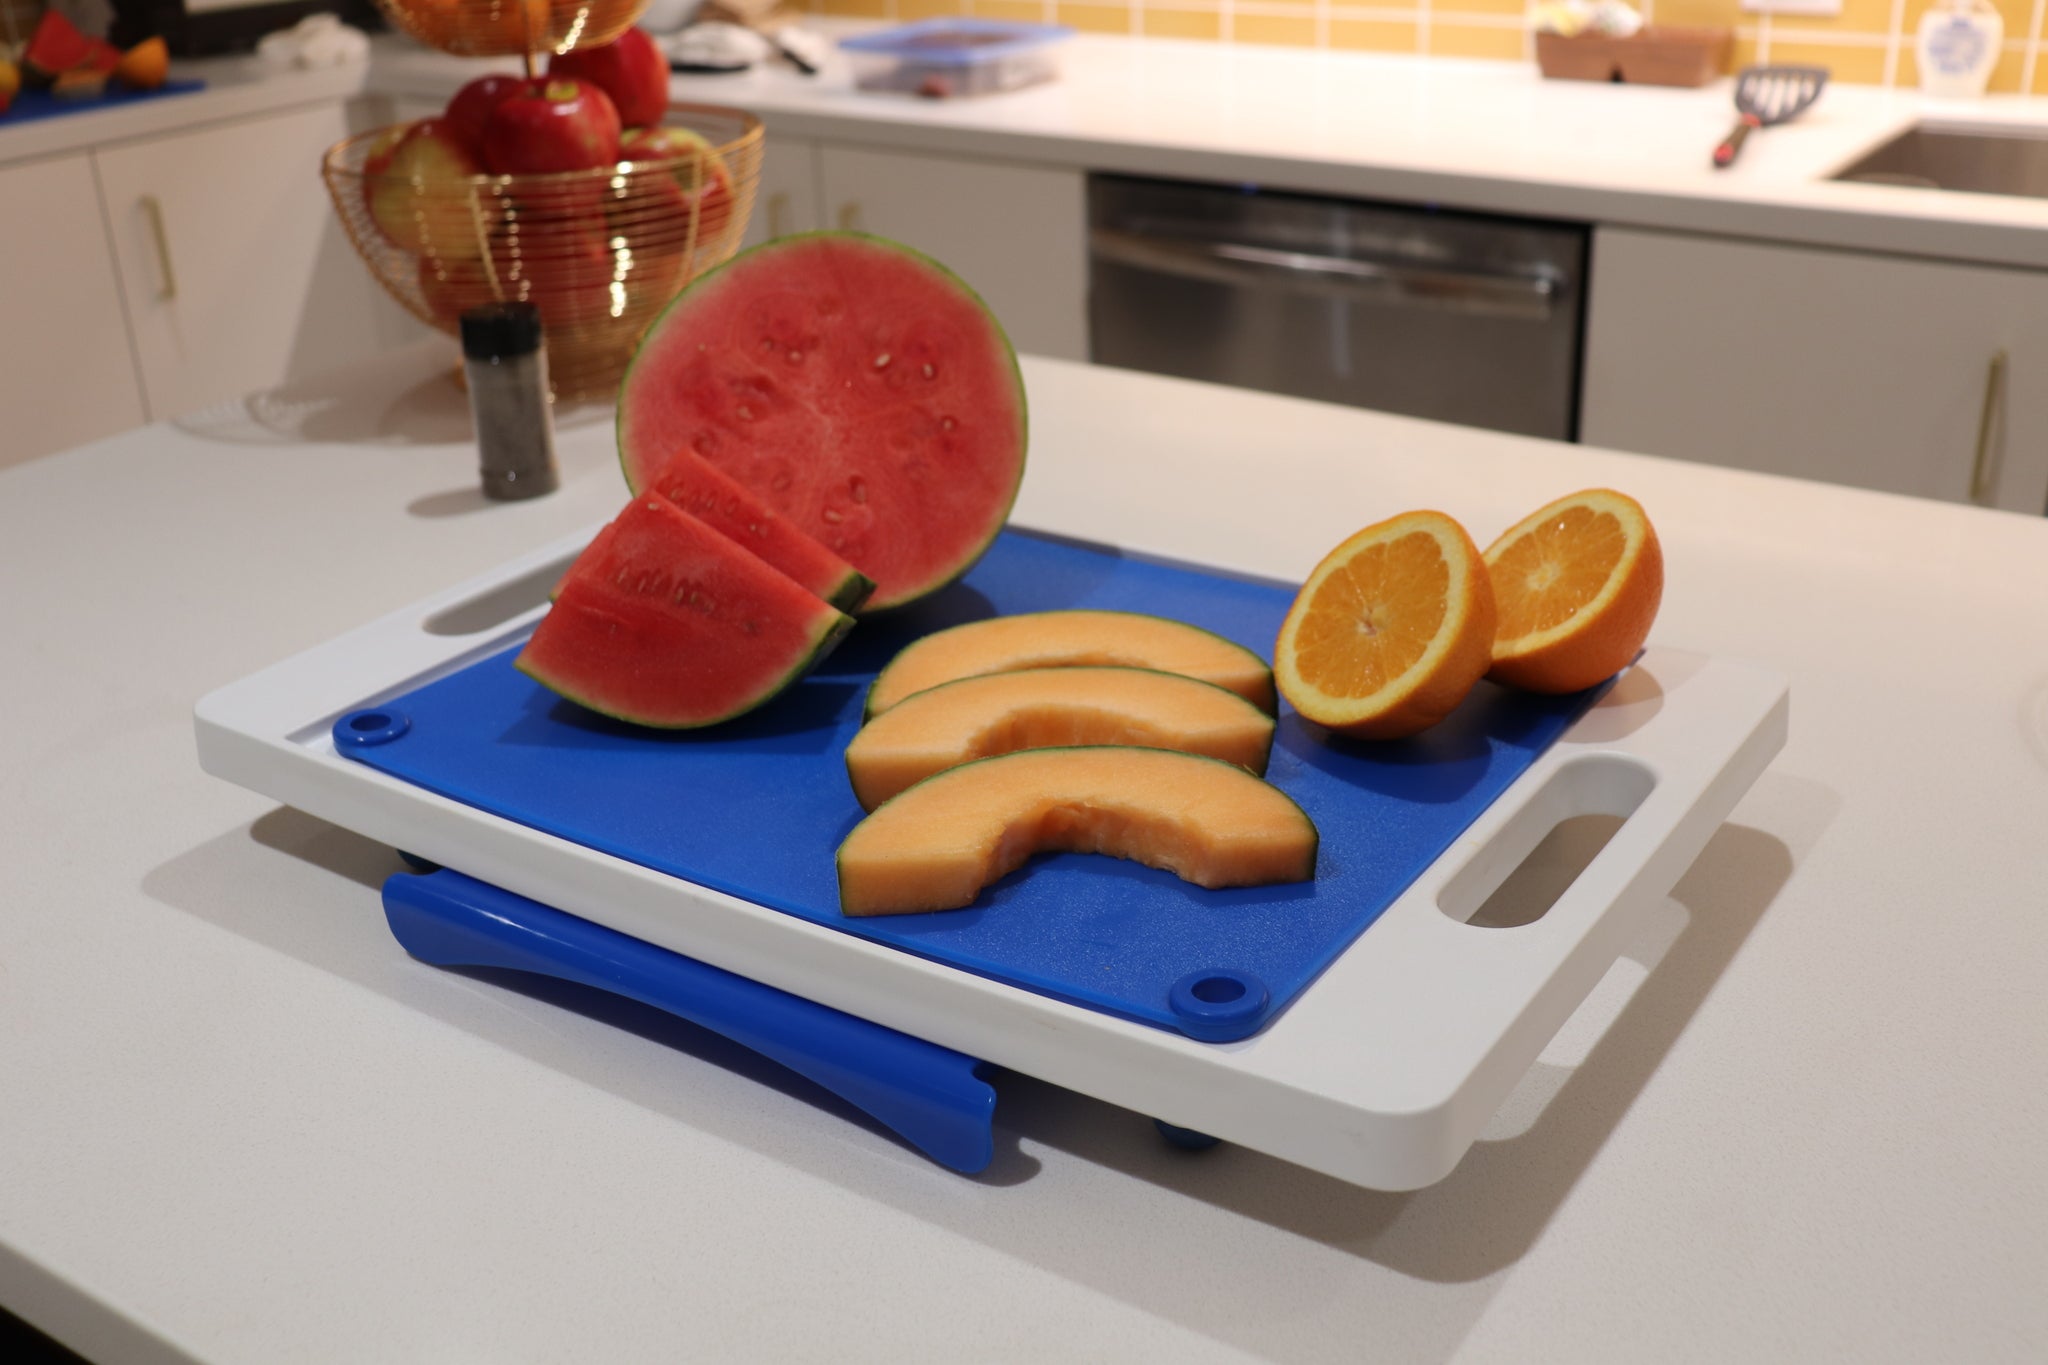 Dripless Cutting Board 2 In 1 System With Digital Meat Thermometer